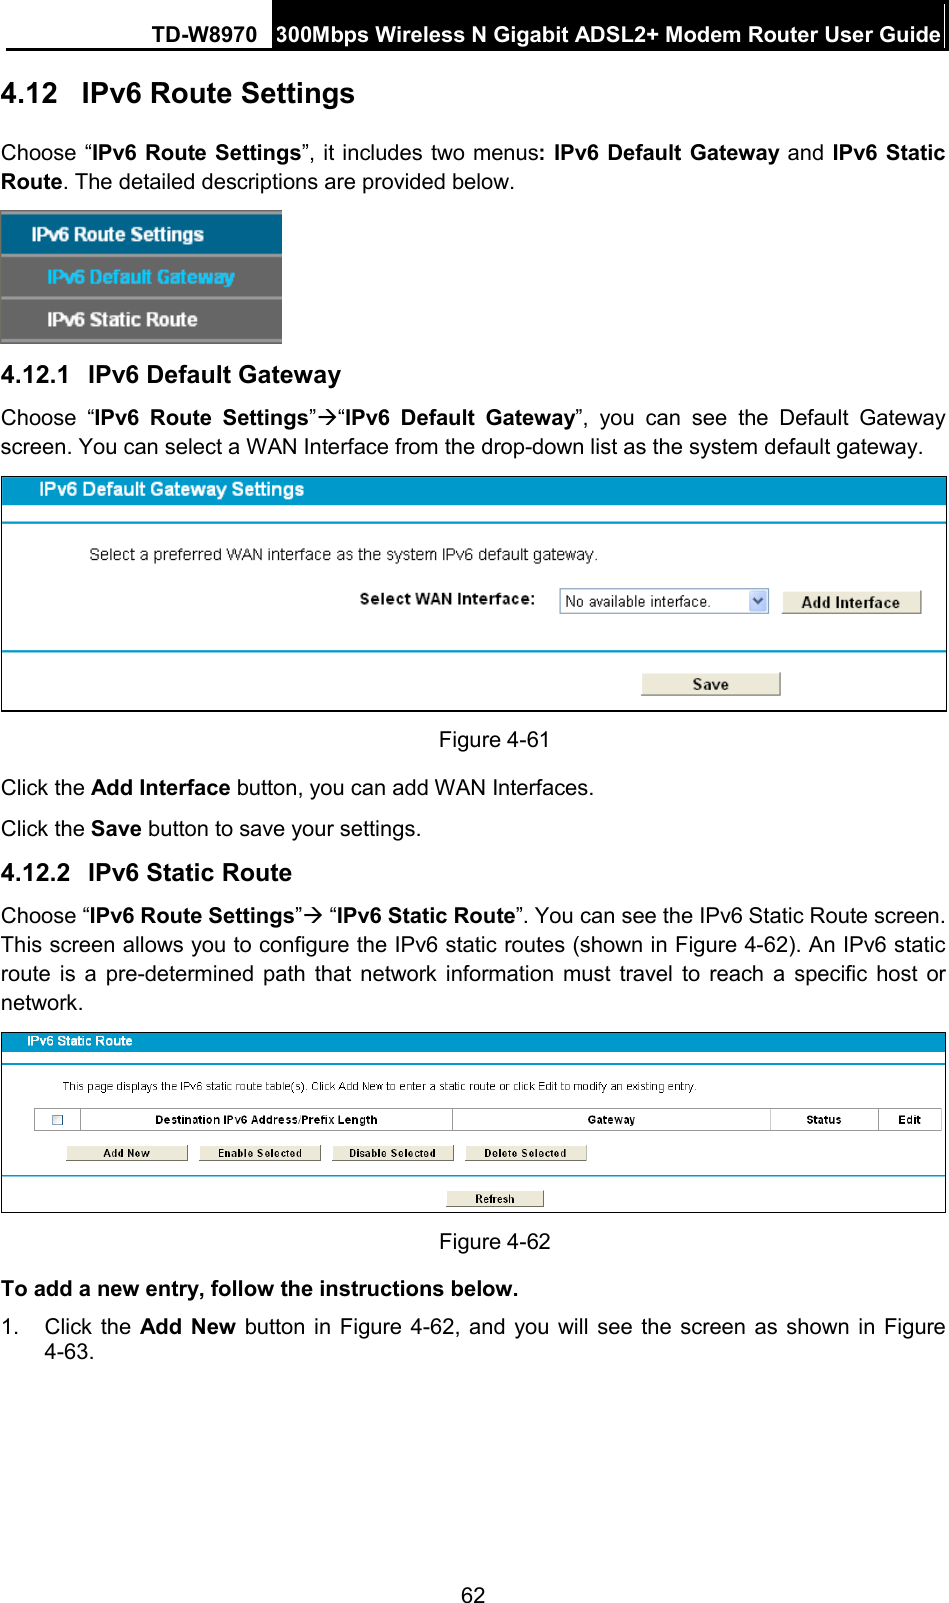 TD-W8970 300Mbps Wireless N Gigabit ADSL2+ Modem Router User Guide  4.12  IPv6 Route Settings Choose “IPv6 Route Settings”, it includes two menus: IPv6 Default Gateway and IPv6 Static Route. The detailed descriptions are provided below.  4.12.1 IPv6 Default Gateway Choose “IPv6 Route  Settings”“IPv6 Default Gateway”, you can see the Default Gateway screen. You can select a WAN Interface from the drop-down list as the system default gateway.    Figure 4-61 Click the Add Interface button, you can add WAN Interfaces. Click the Save button to save your settings. 4.12.2 IPv6 Static Route Choose “IPv6 Route Settings” “IPv6 Static Route”. You can see the IPv6 Static Route screen. This screen allows you to configure the IPv6 static routes (shown in Figure 4-62). An IPv6 static route is a pre-determined path that network information must travel to reach a specific host or network.  Figure 4-62 To add a new entry, follow the instructions below. 1.  Click the Add New button in Figure 4-62, and you will see the screen as shown in Figure 4-63. 62 